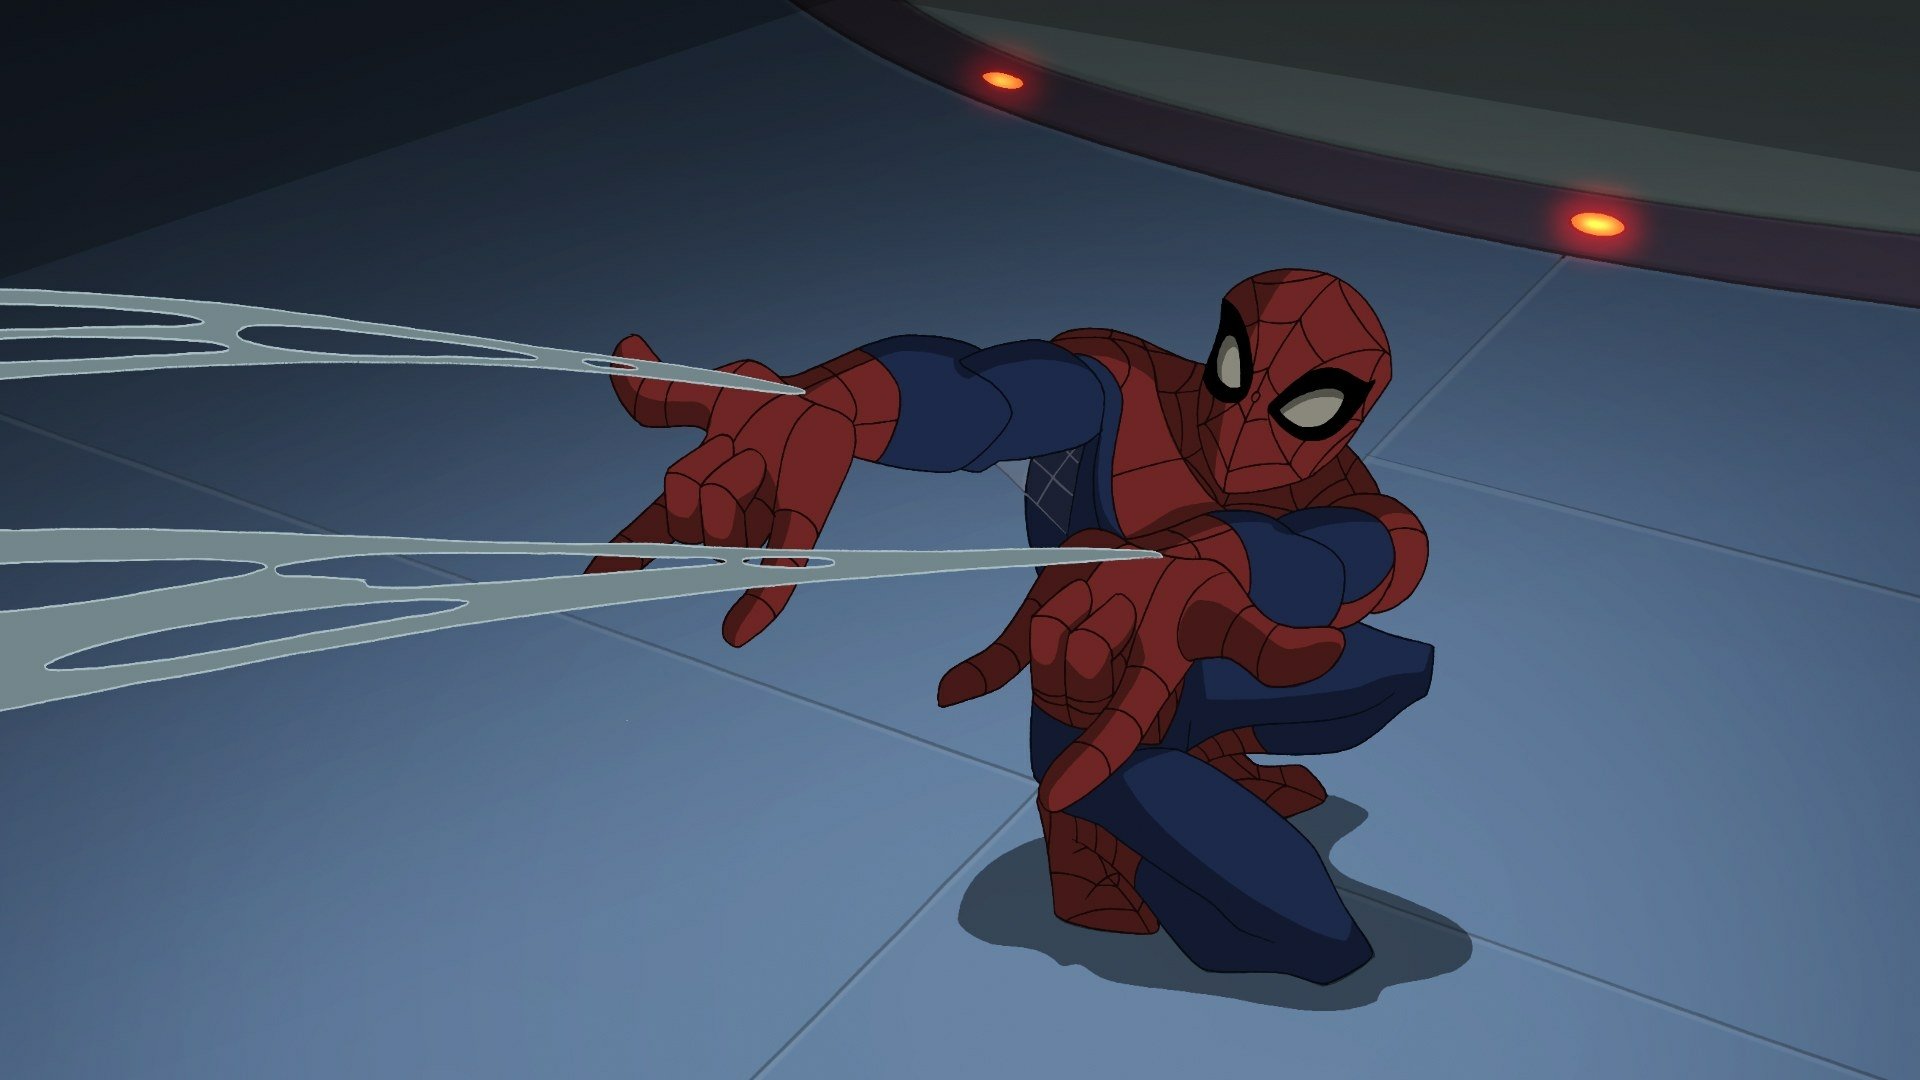 Animated Girls images Spectacular Spider-Man girls HD 